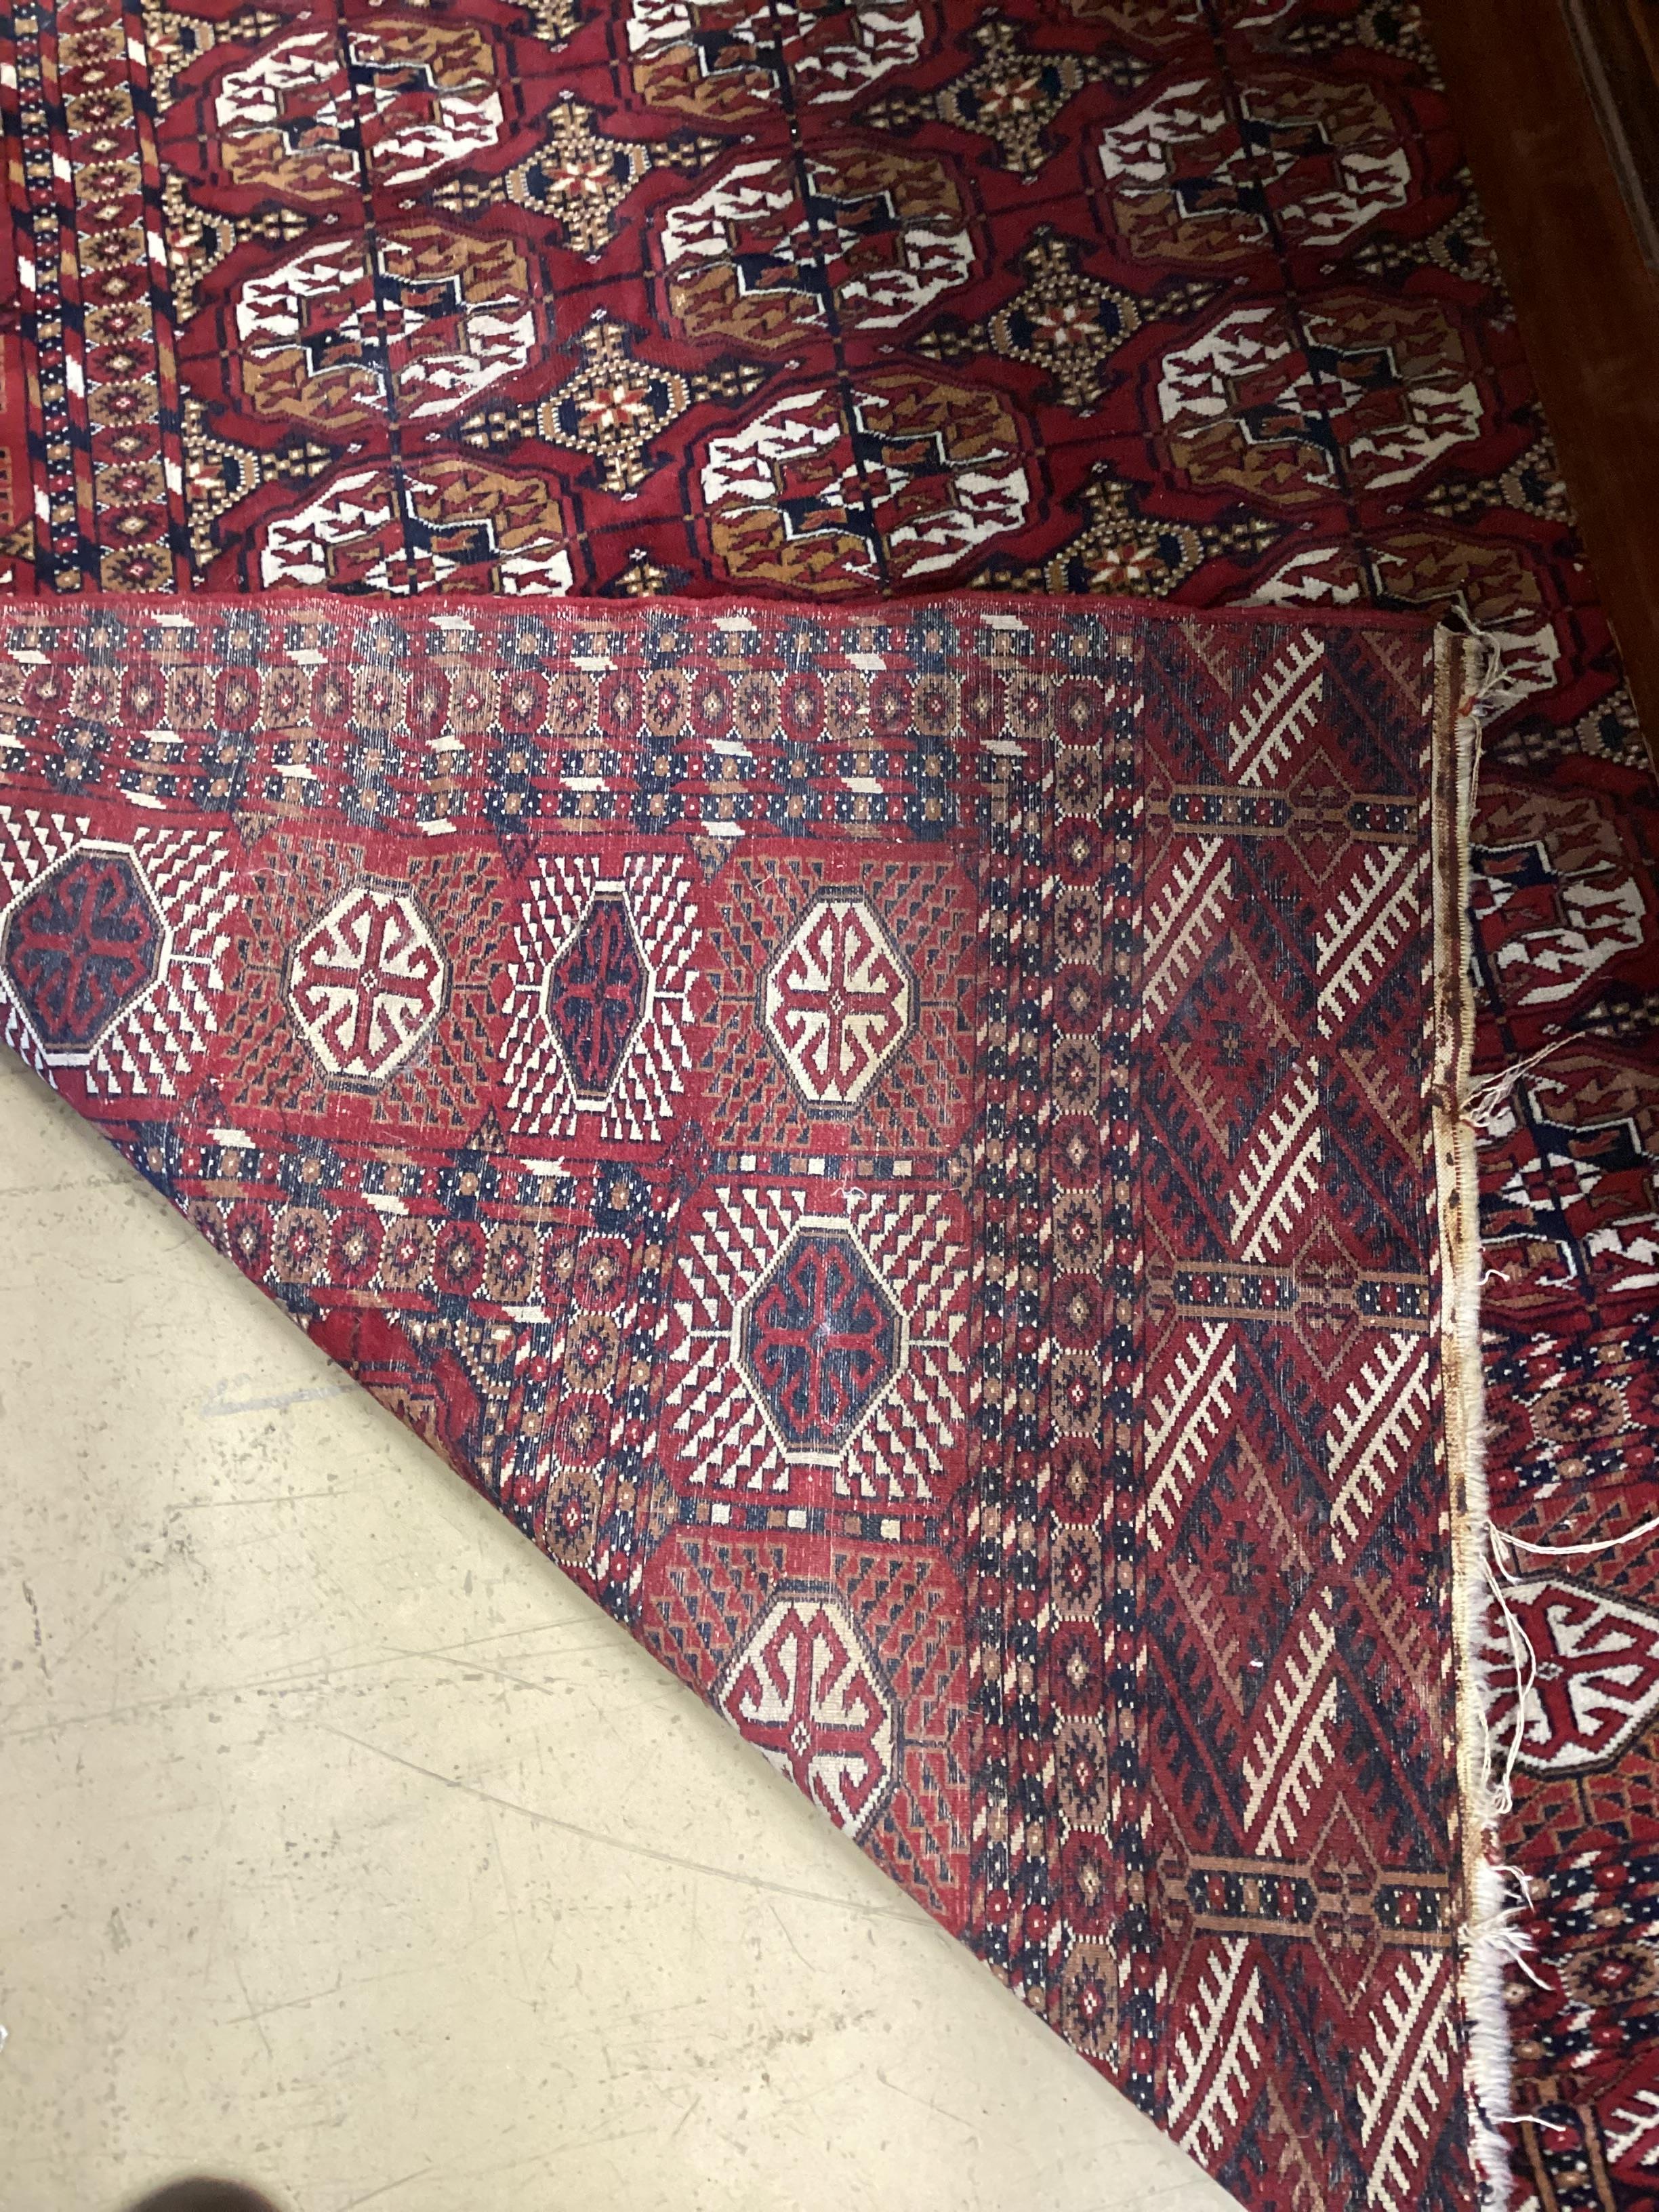 A Bokhara rug and a Belouch runner larger 250cm x 156cm, 200cm x 107cm